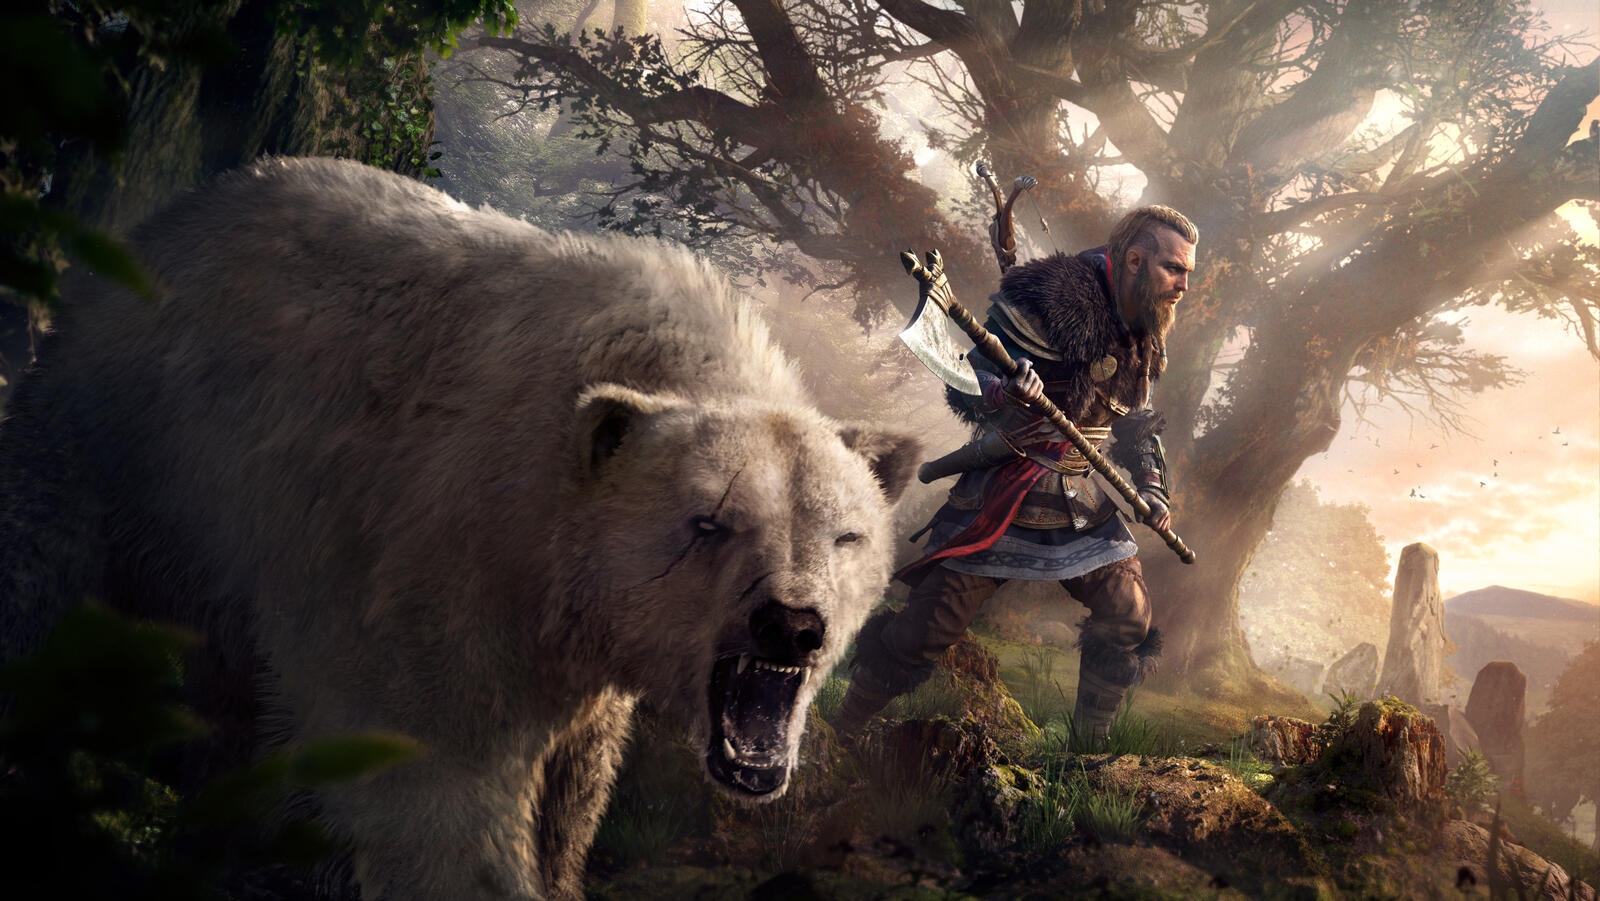 Free photo The bear screensaver from assassins creed valhalla.